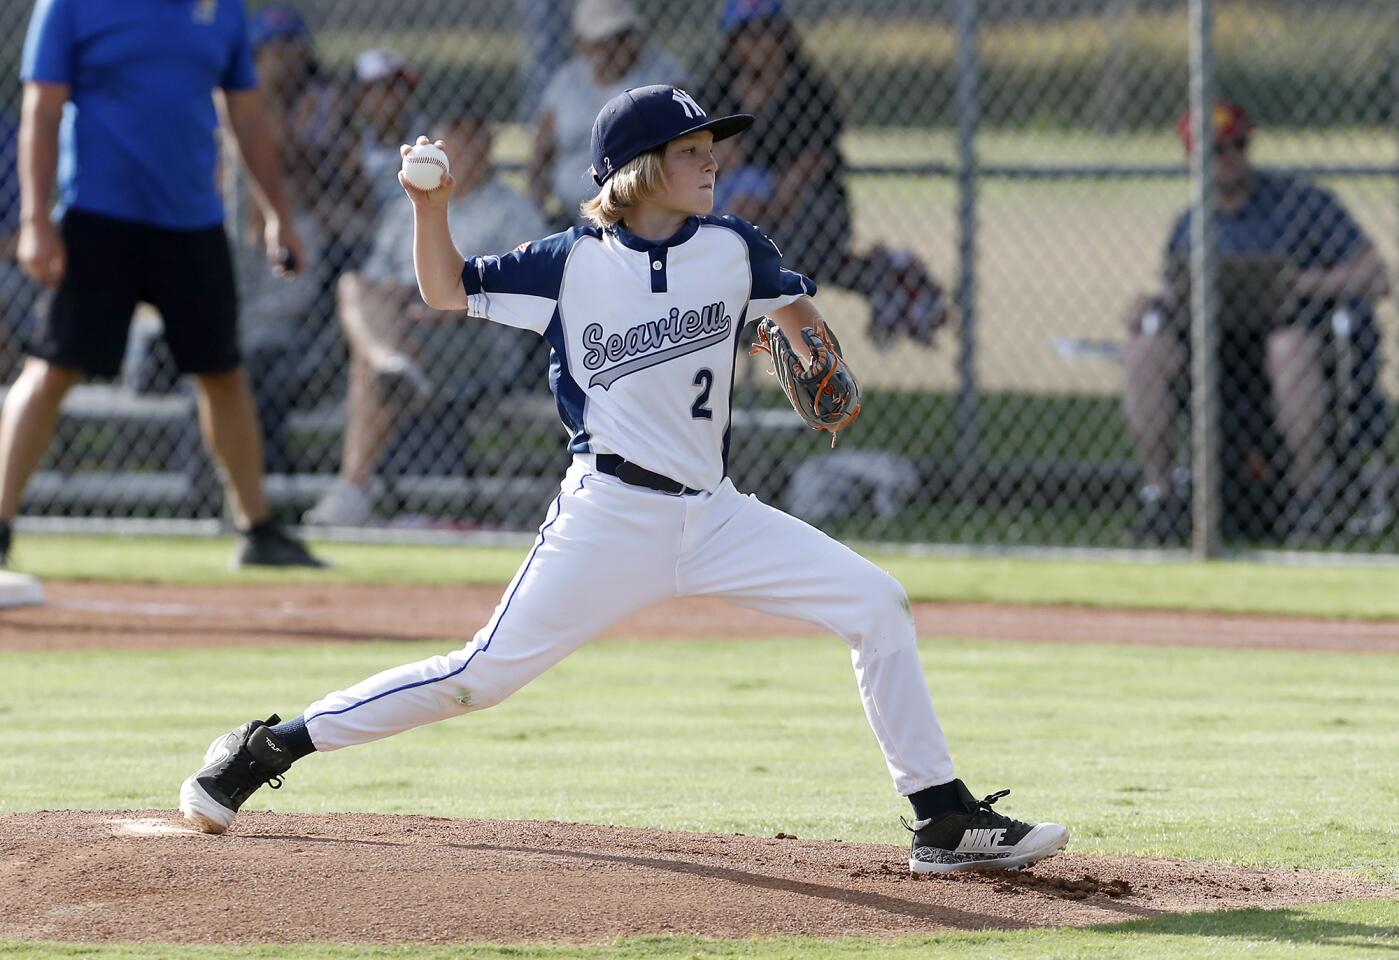 Colin Crinella pitches for Seaview Little League No. 2 against Huntington Valley No. 1 in a District 62 Tournament of Champions Minor A Division quarterfinal game on Tuesday at Costa Mesa American Little League.